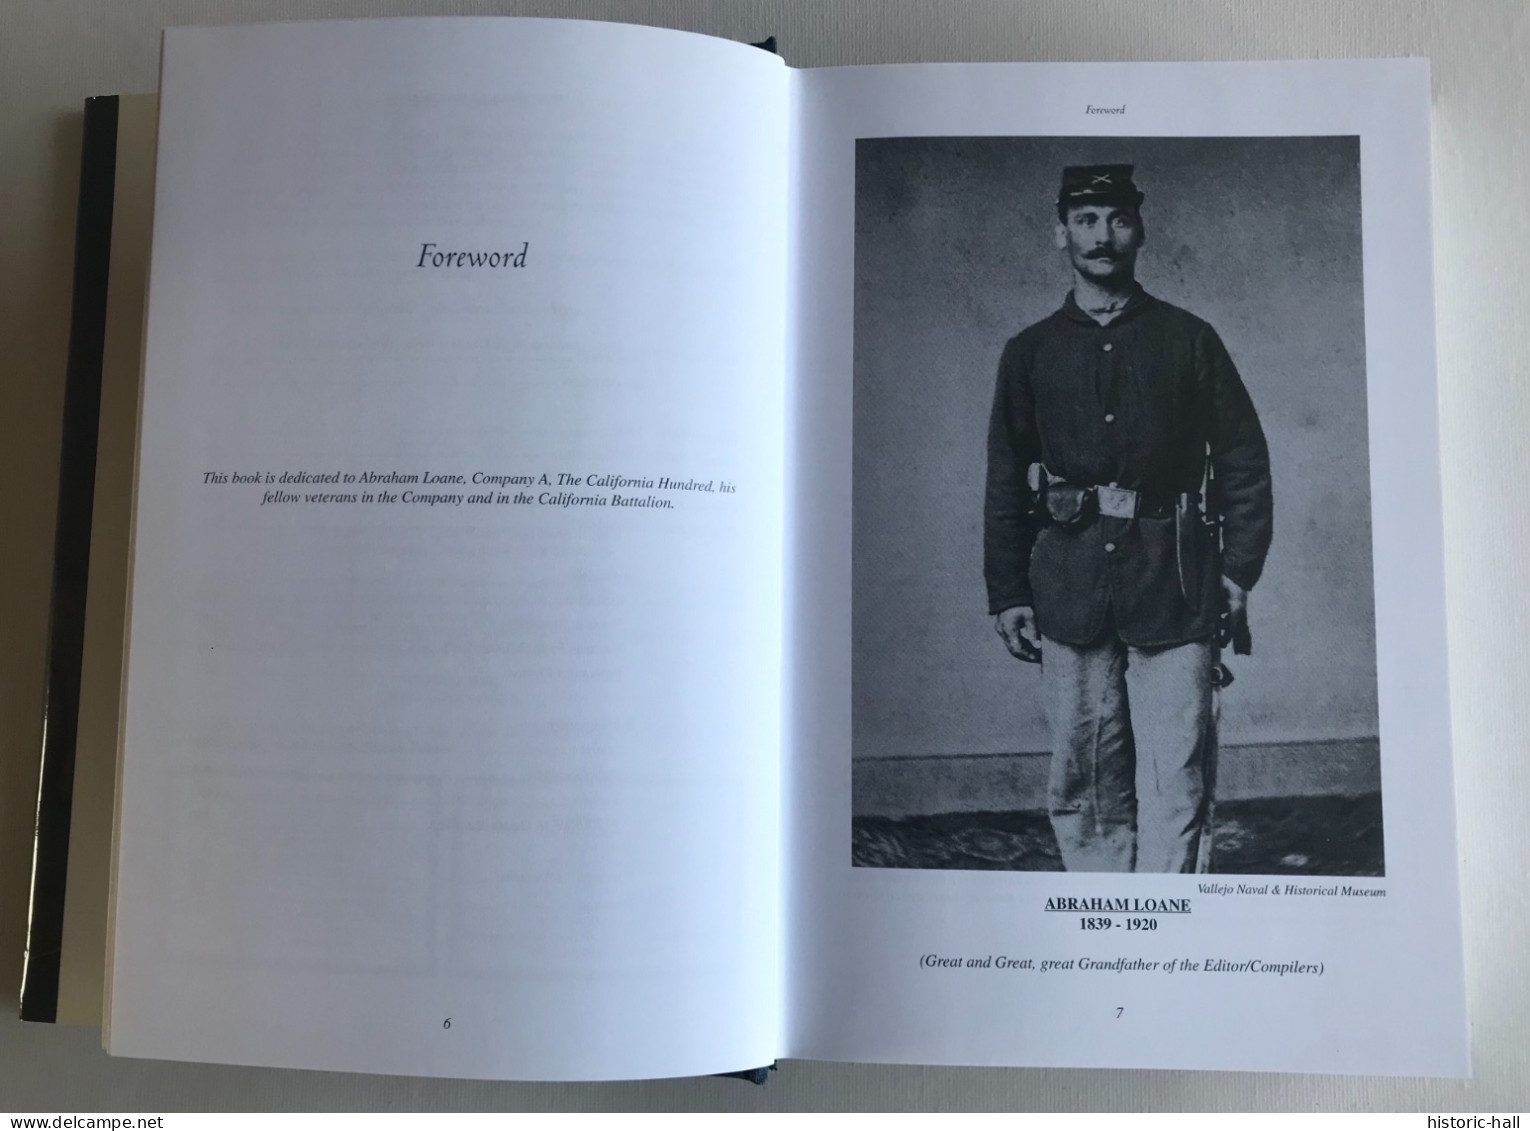 Their Horses Climbed Trees: A Chronicle Of The California 100 And Battalion In The Civil War From San Francisco - 2001 - US-Force